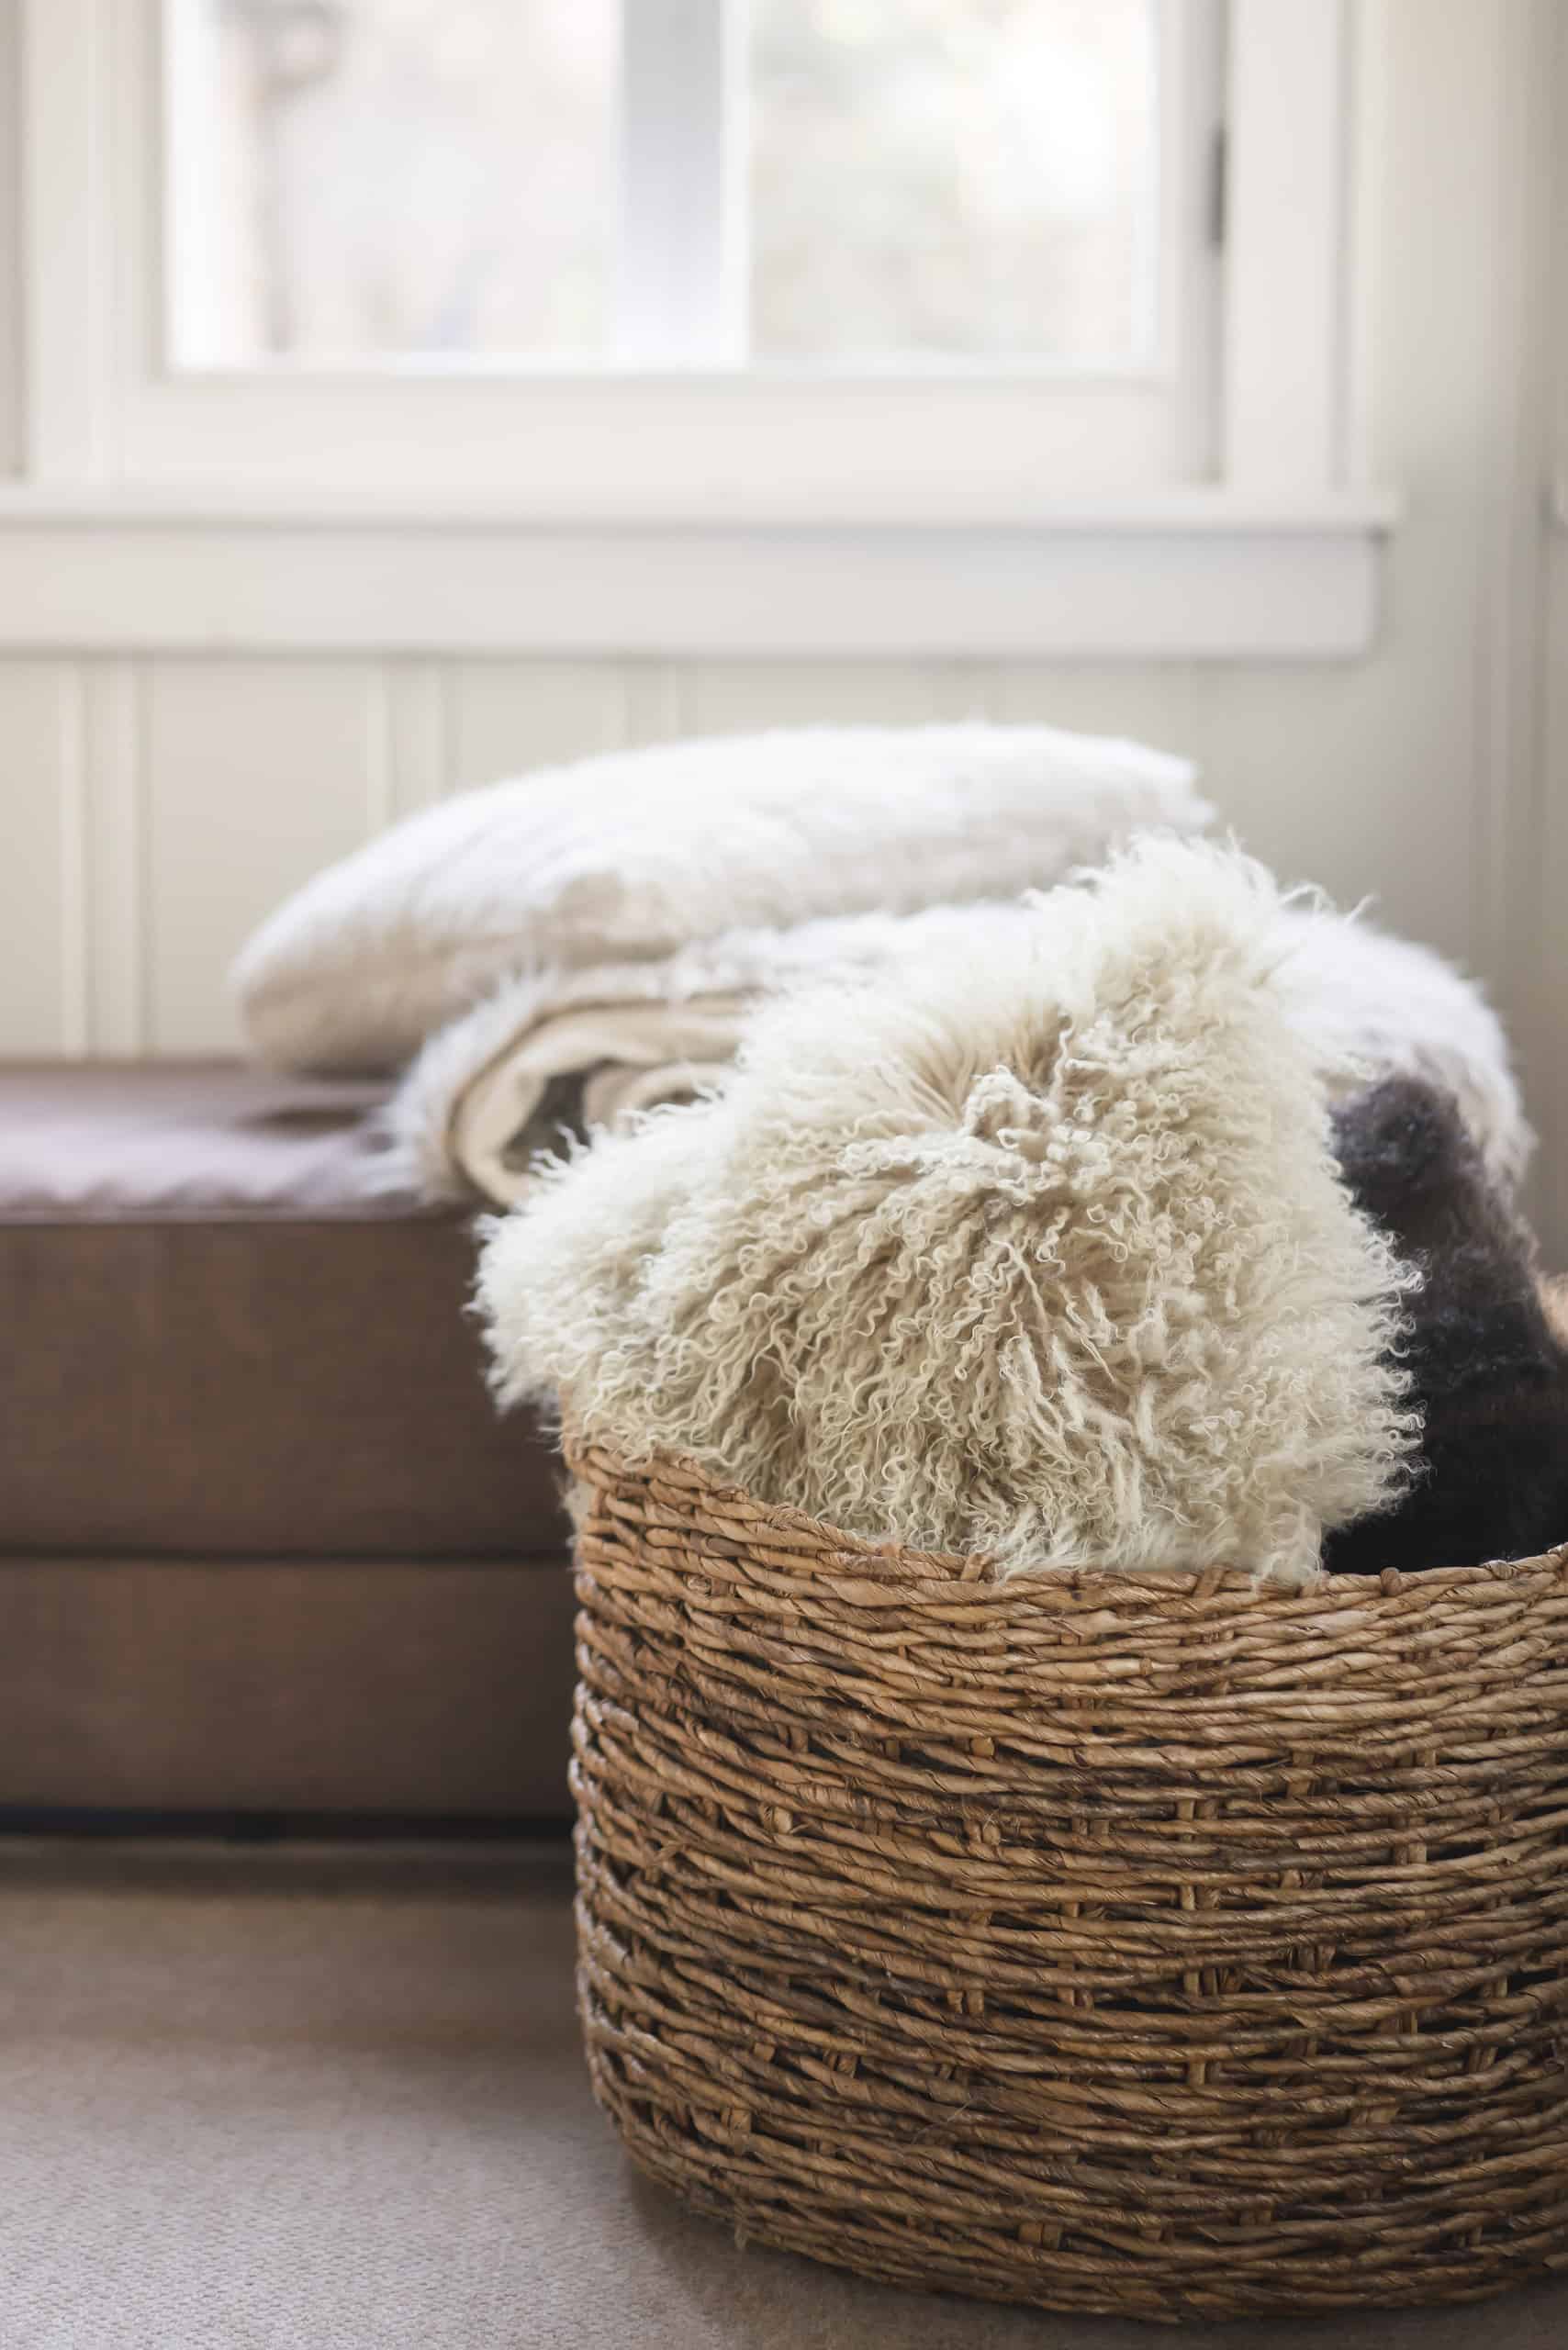 How to Create the Cozy Home You Crave